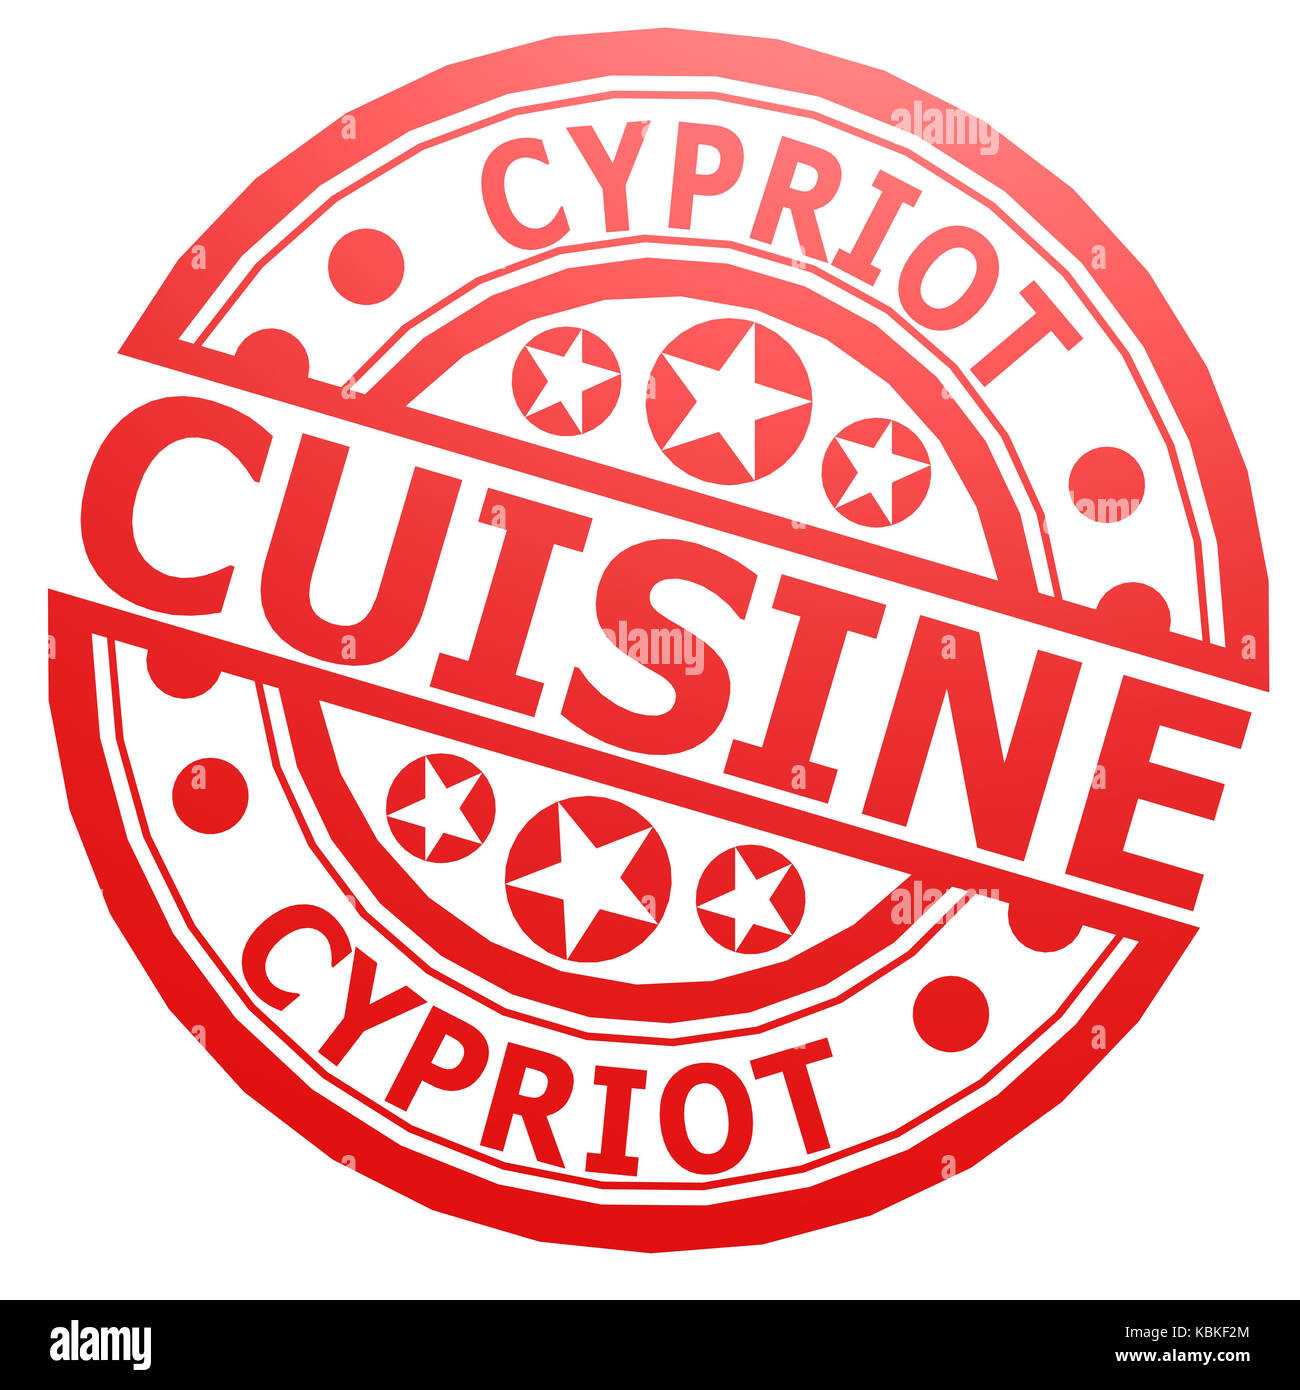 Cypriot cuisine stamp Stock Photo